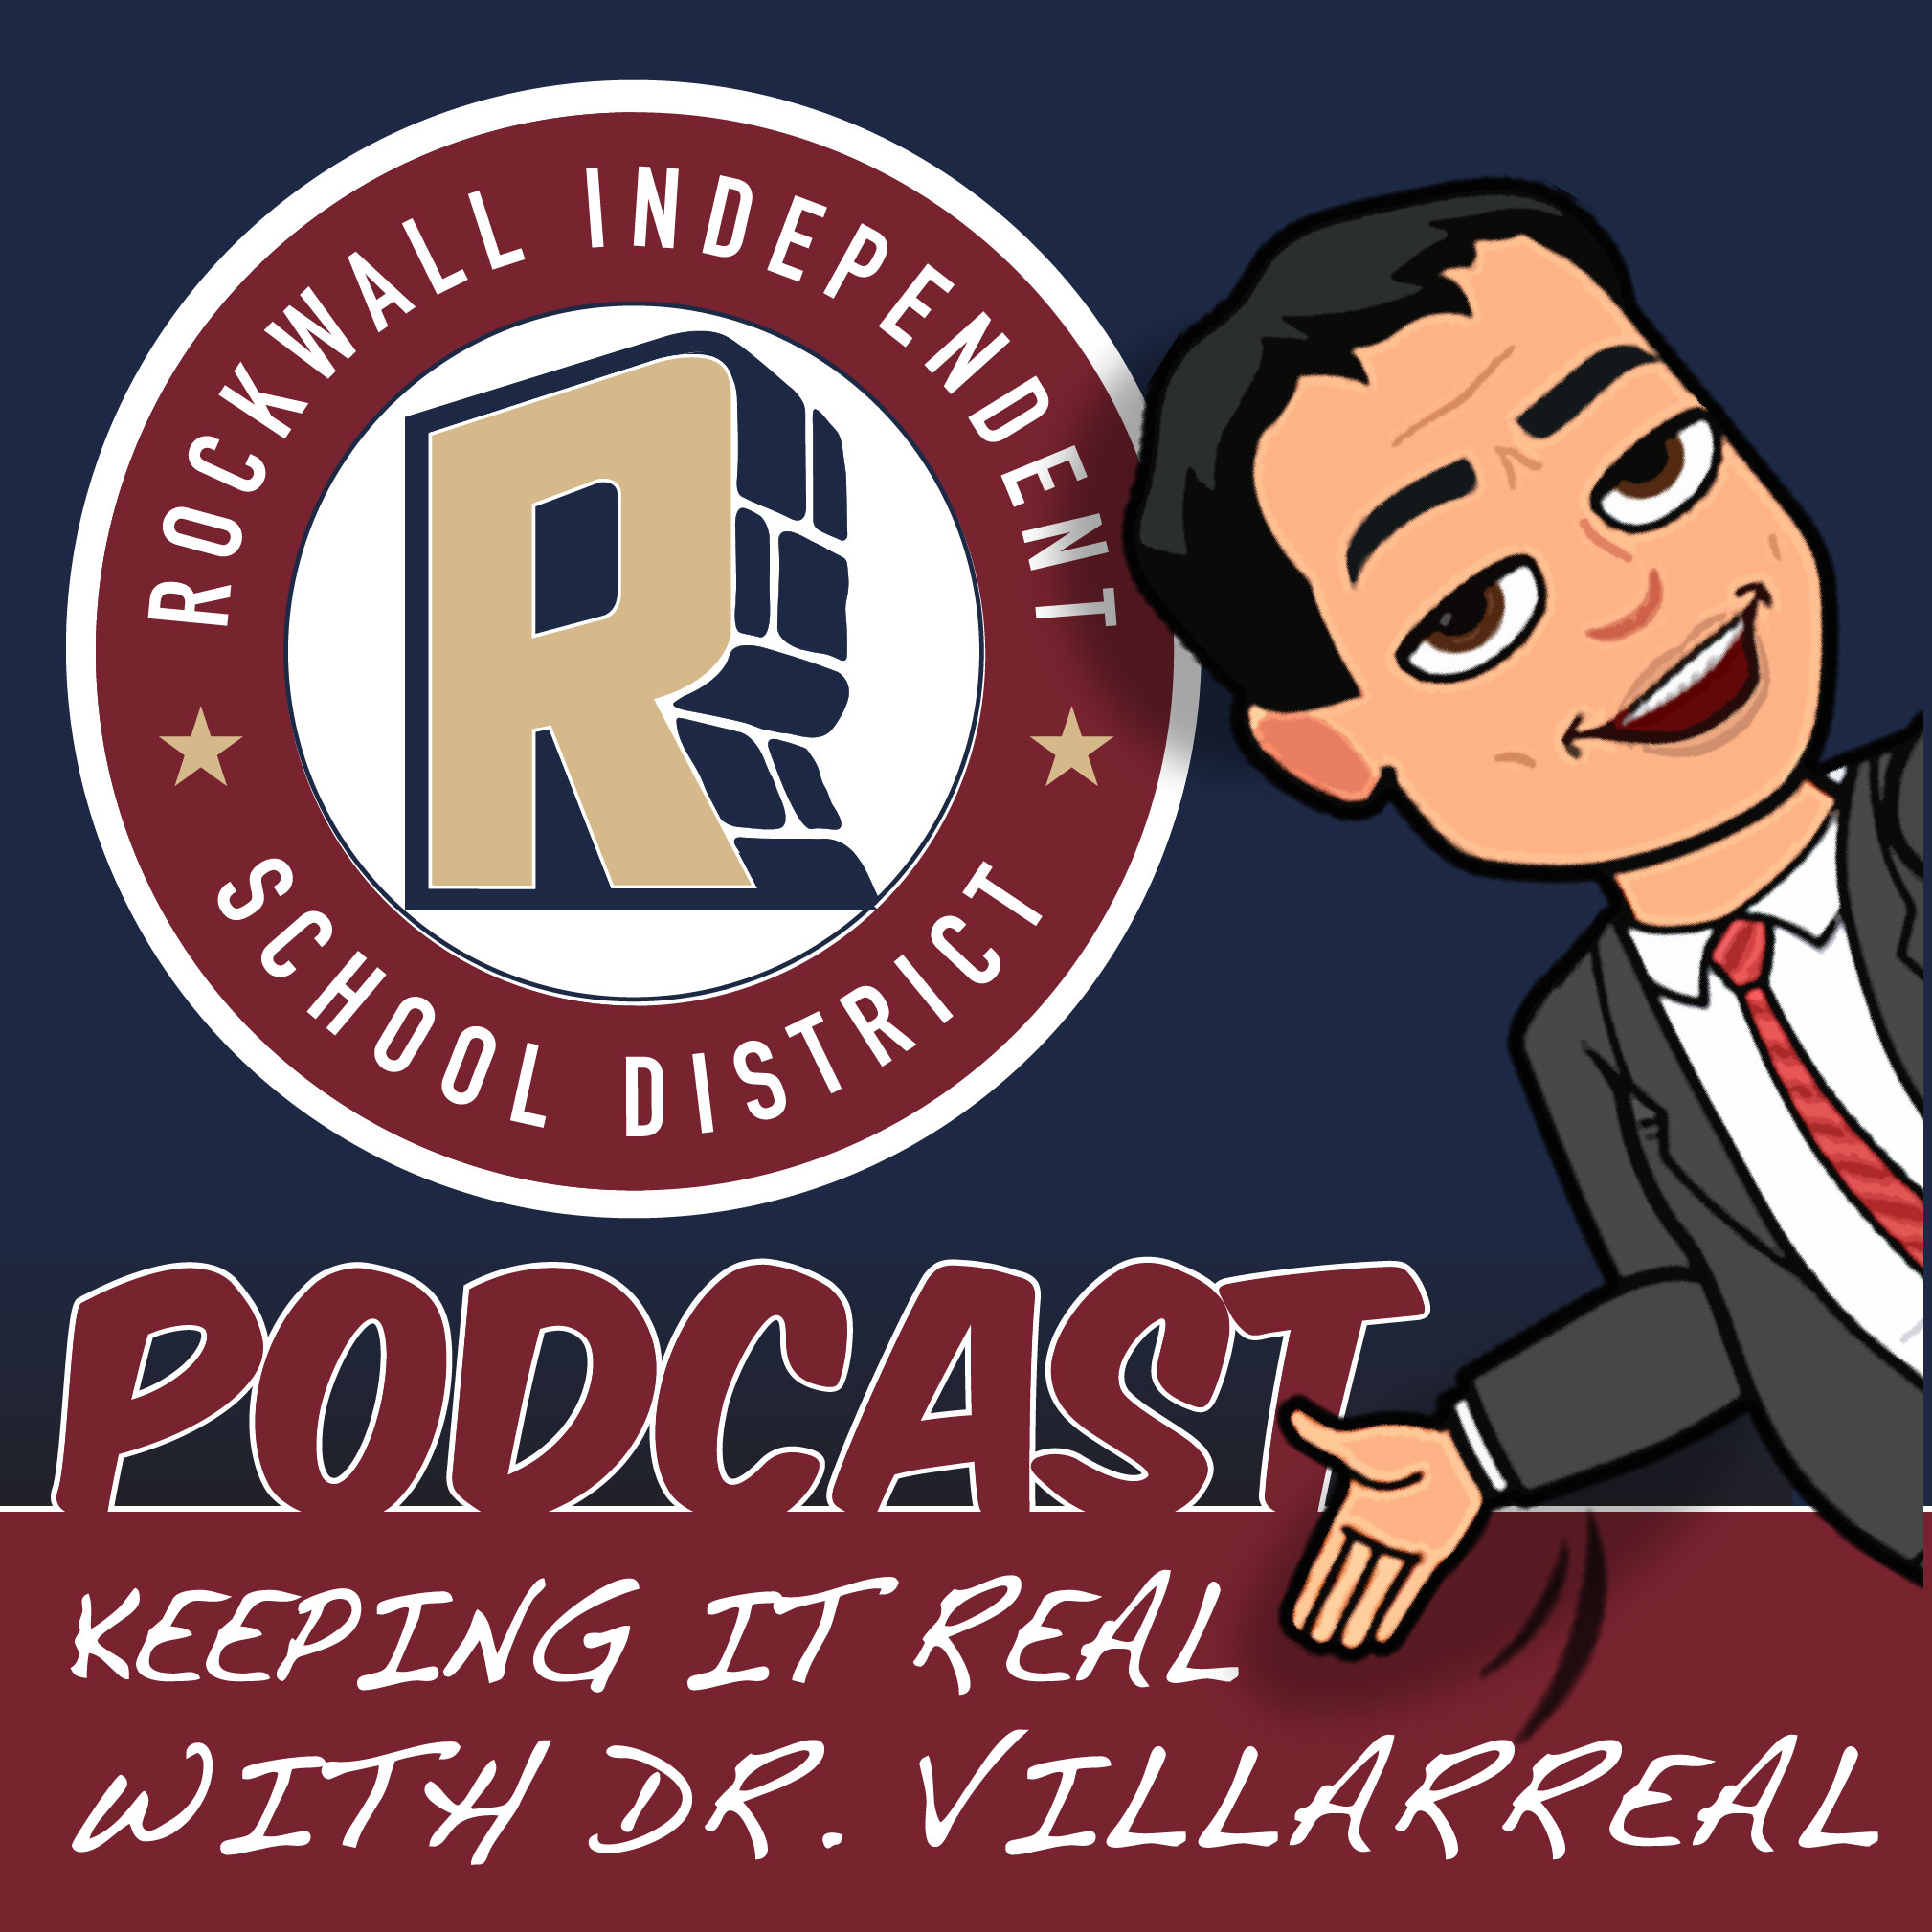 Rockwall ISD Podcast: Keeping it Real with Dr. Villarreal – Coaches Spradlin, Webb and Reeves